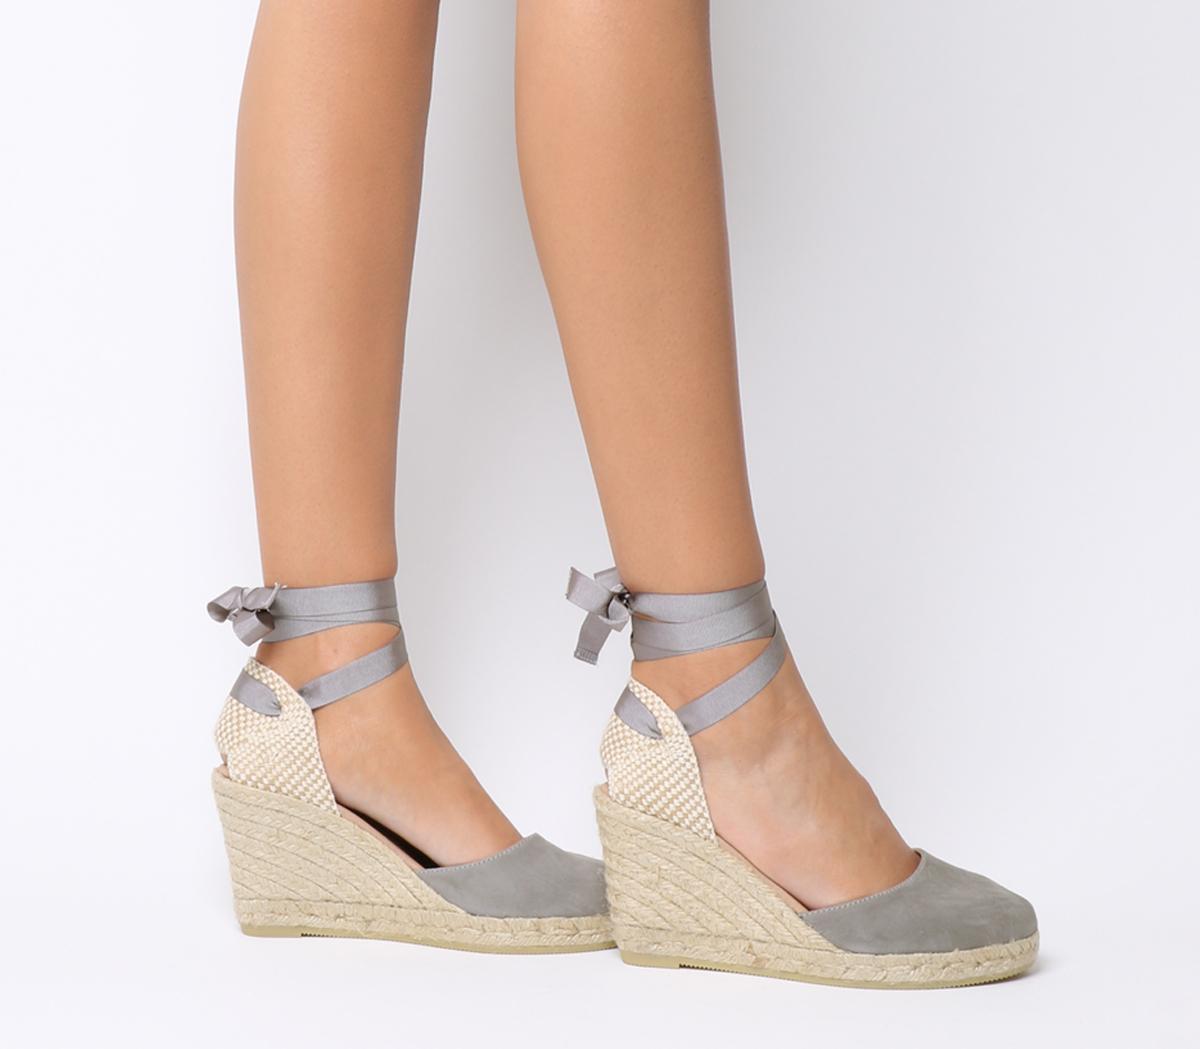 wedges wrap around ankle